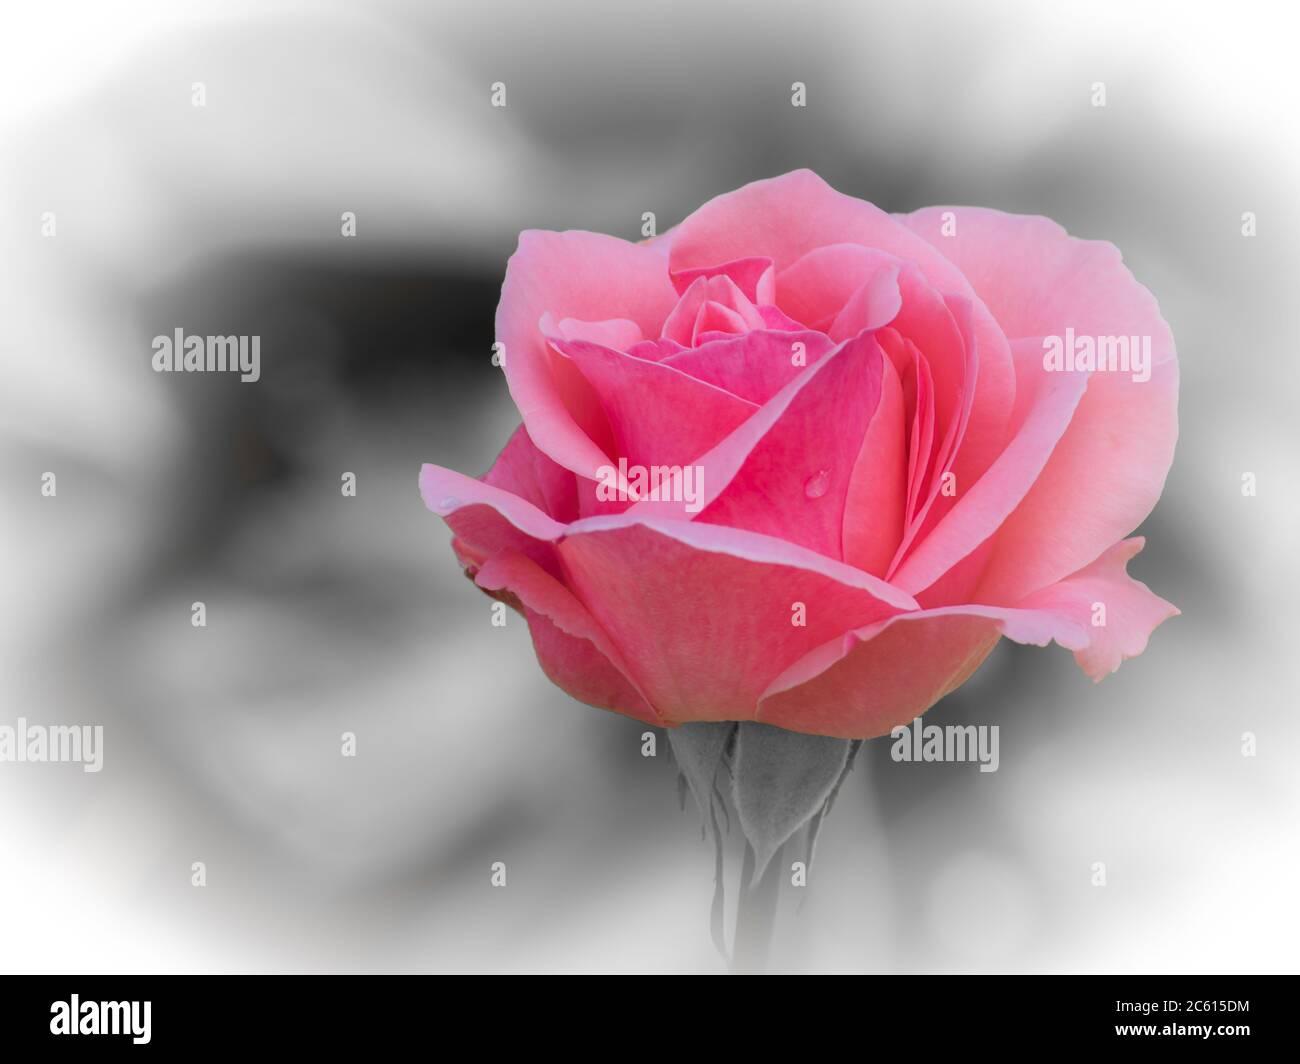 Romantic pinkish rose with a raindrop on the petal with a grey defocussed background Stock Photo